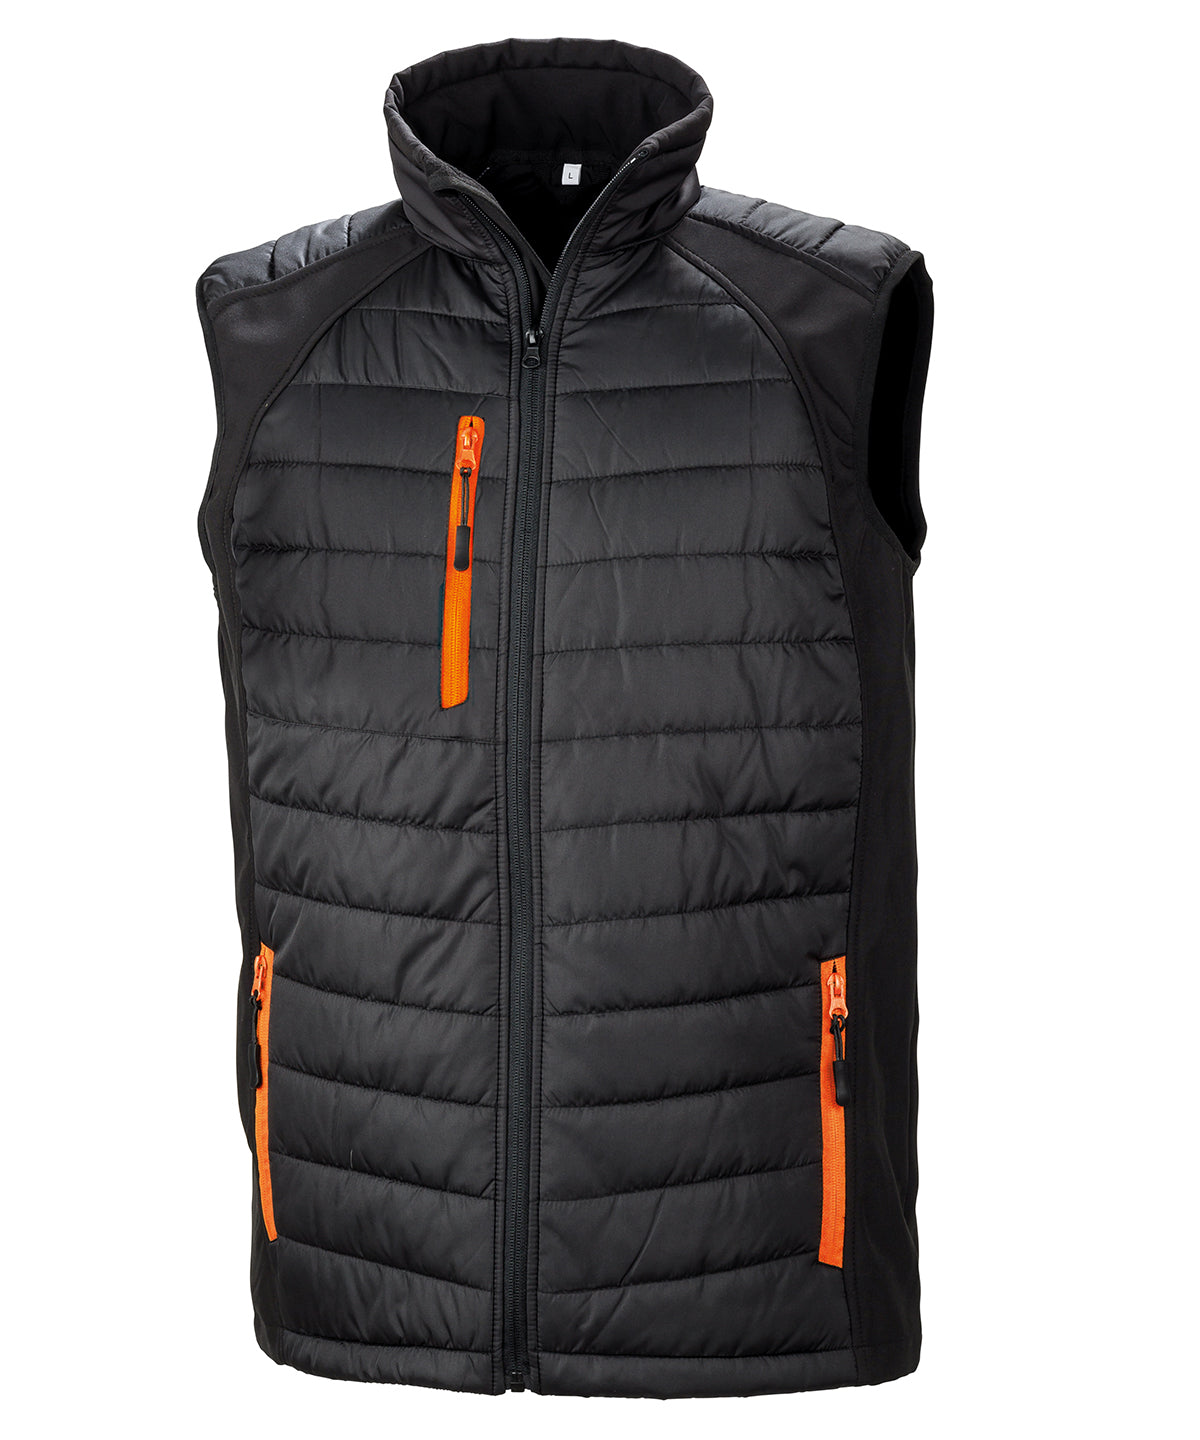 4x Embroidered Result Two-Tone Bodywarmer/Gilet with Company Logo